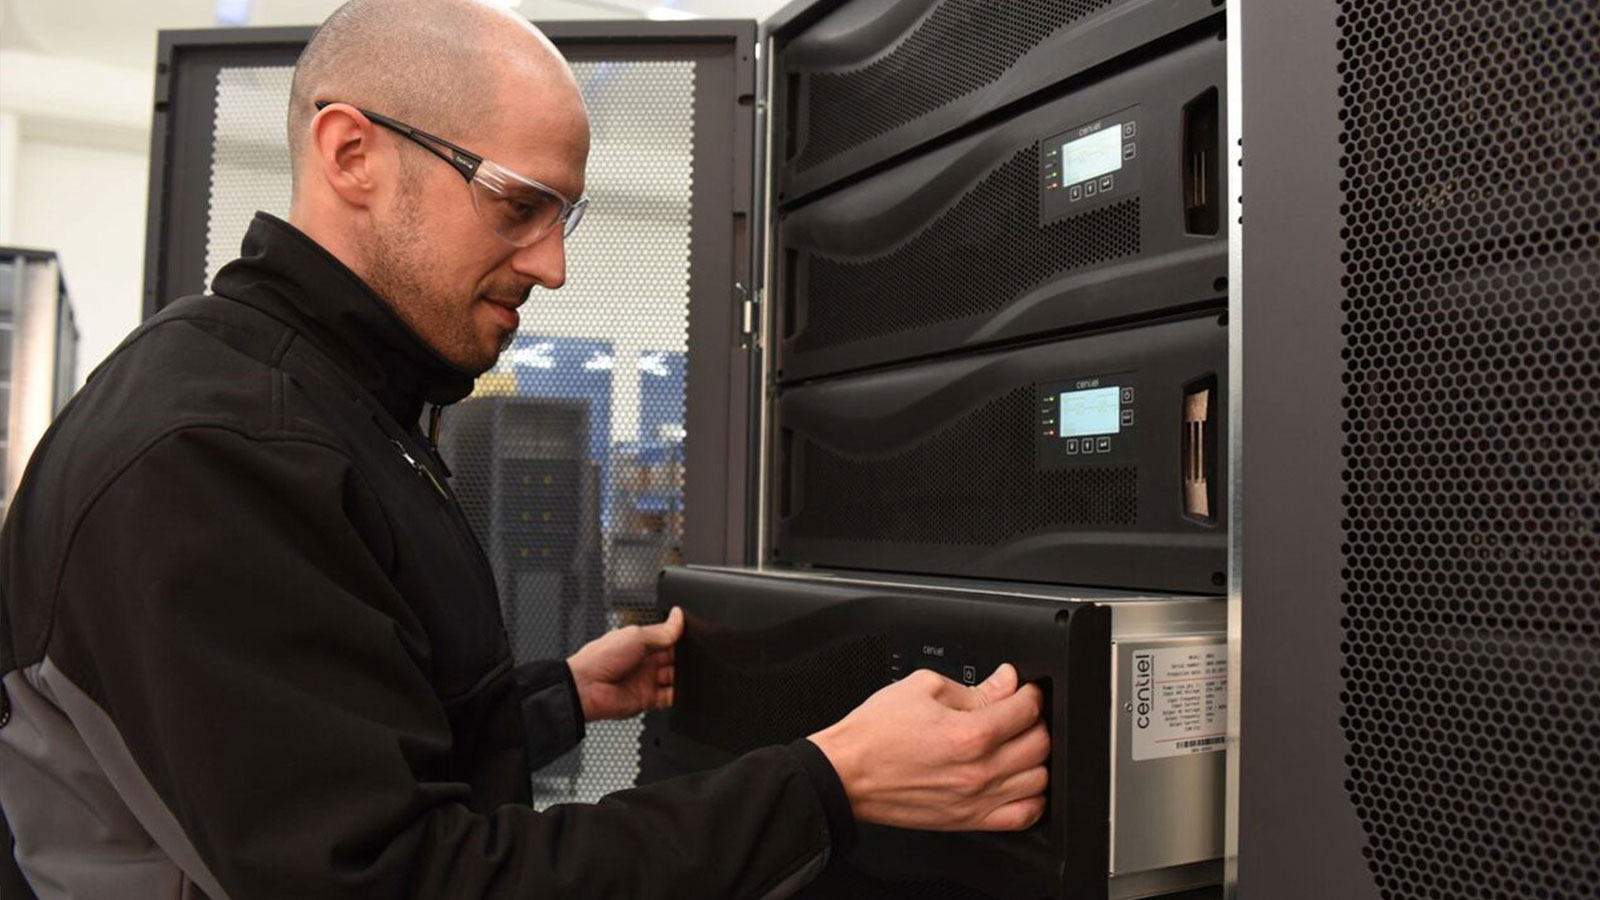 Louis McGarry, Sales and Marketing Director, Centiel UK, offers some top tips on how to ensure your uninterruptible power supply is running efficiently.